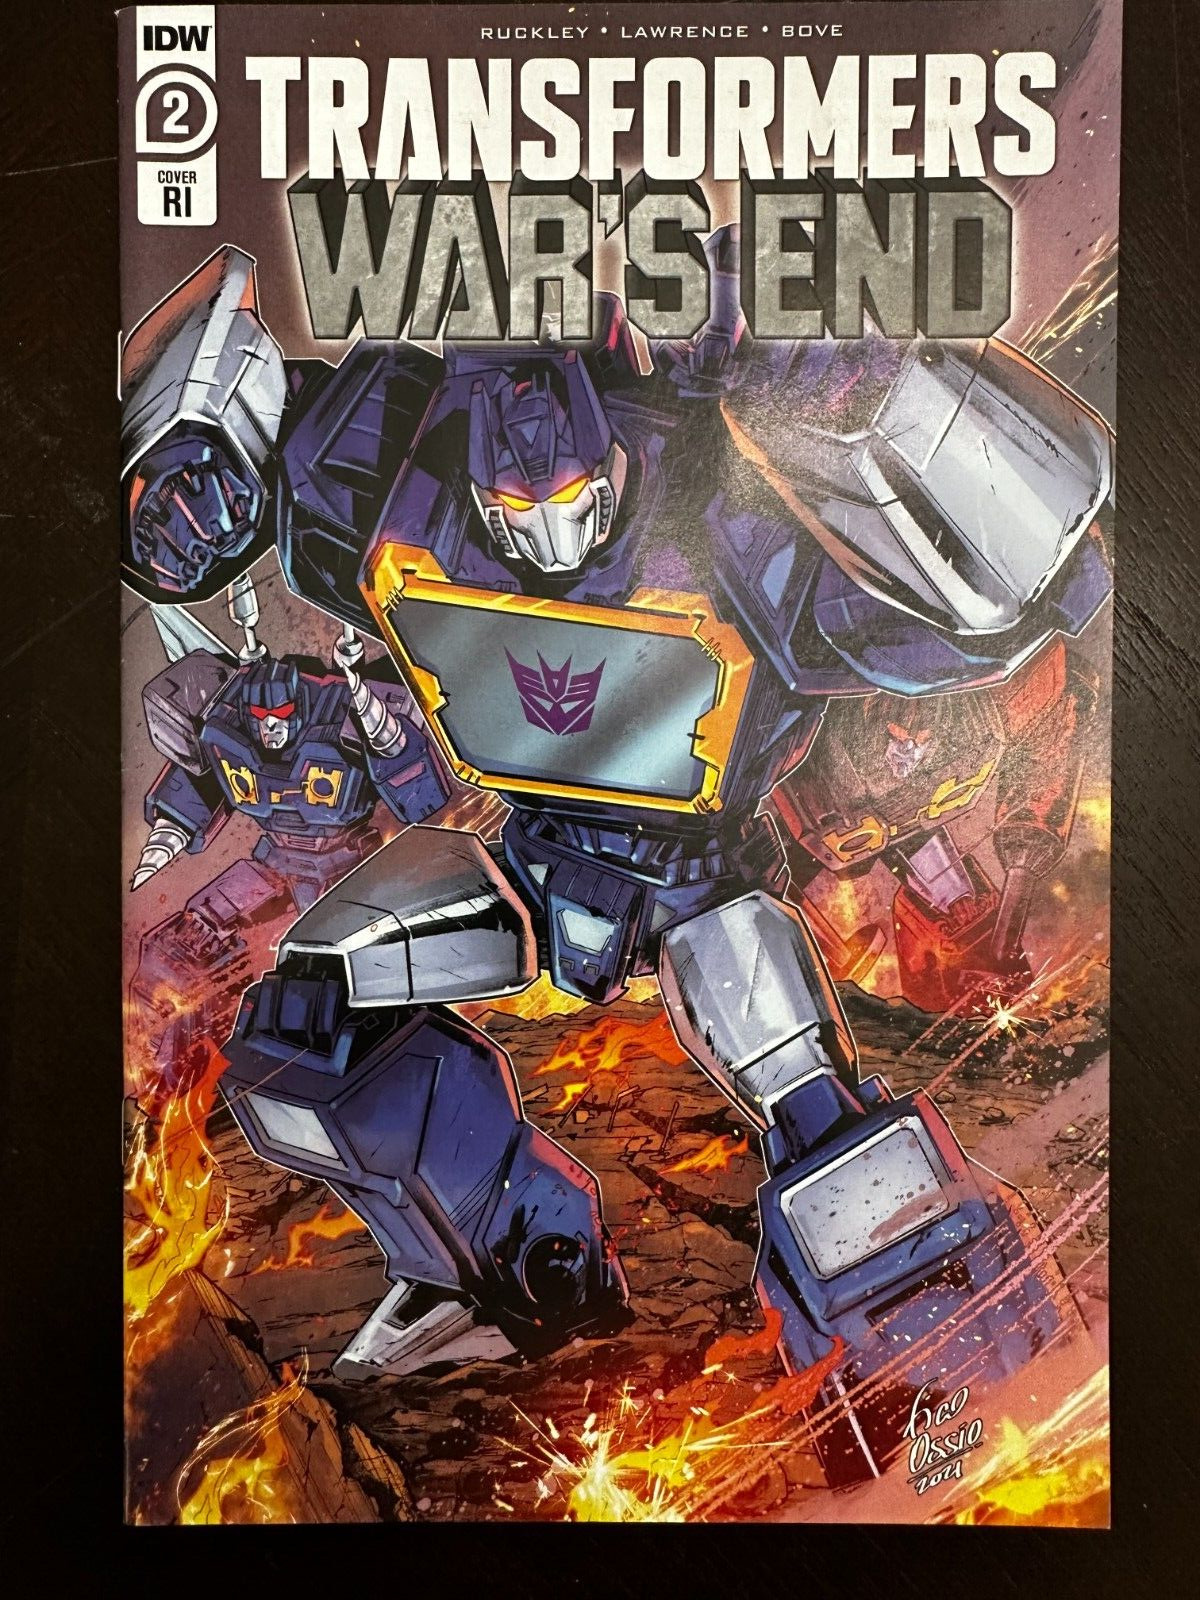 Transformers Wars End #1 1:10 Retailer Incentive Variant IDW